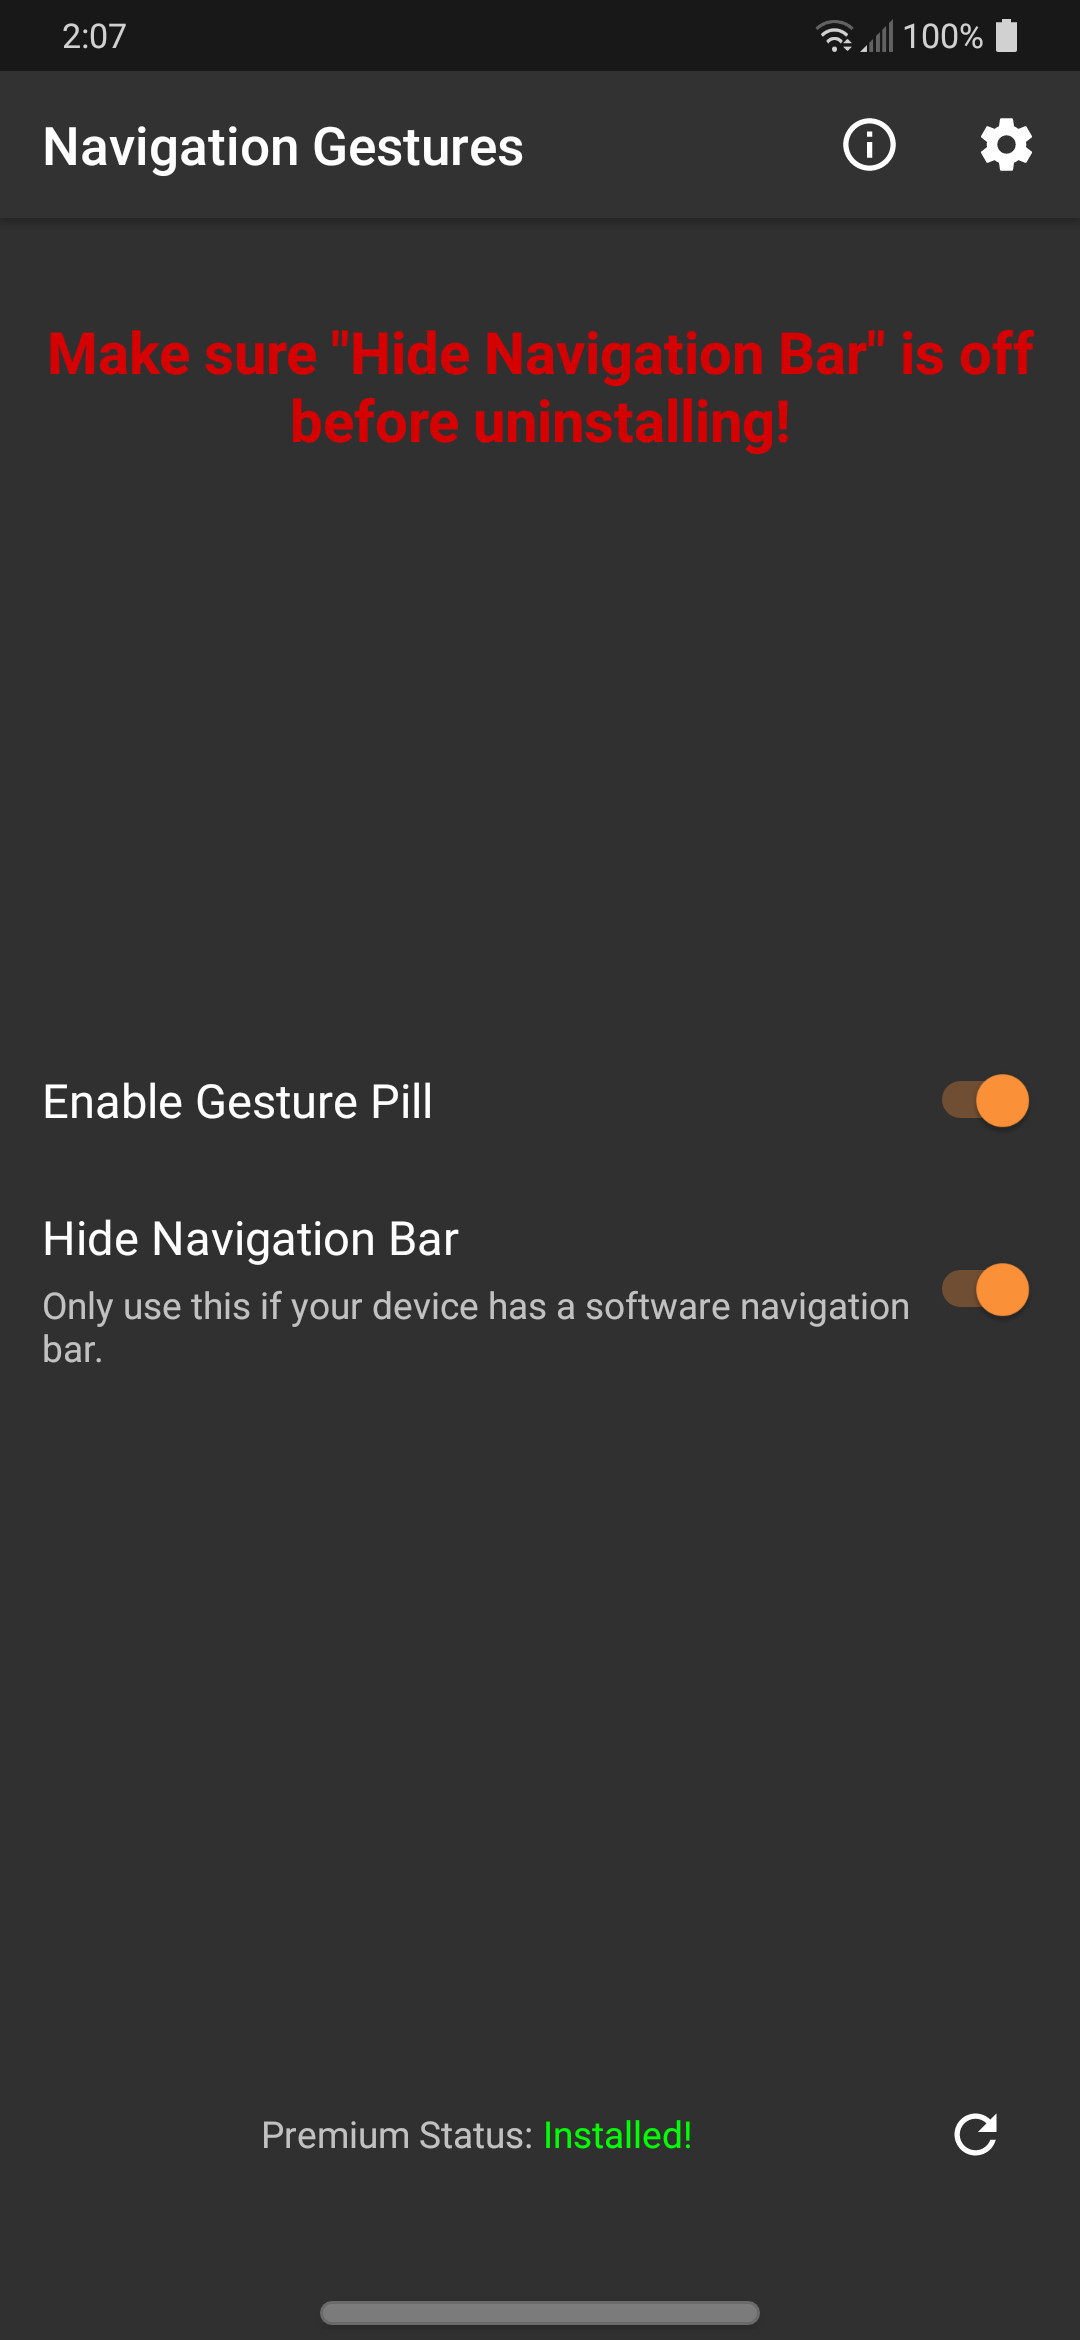 1080x2340 You can now disconnect your phone from your PC and go into the  configurations for the Navigation Gestures app. Toggle the Enable Gesture  Pill and Hide ...